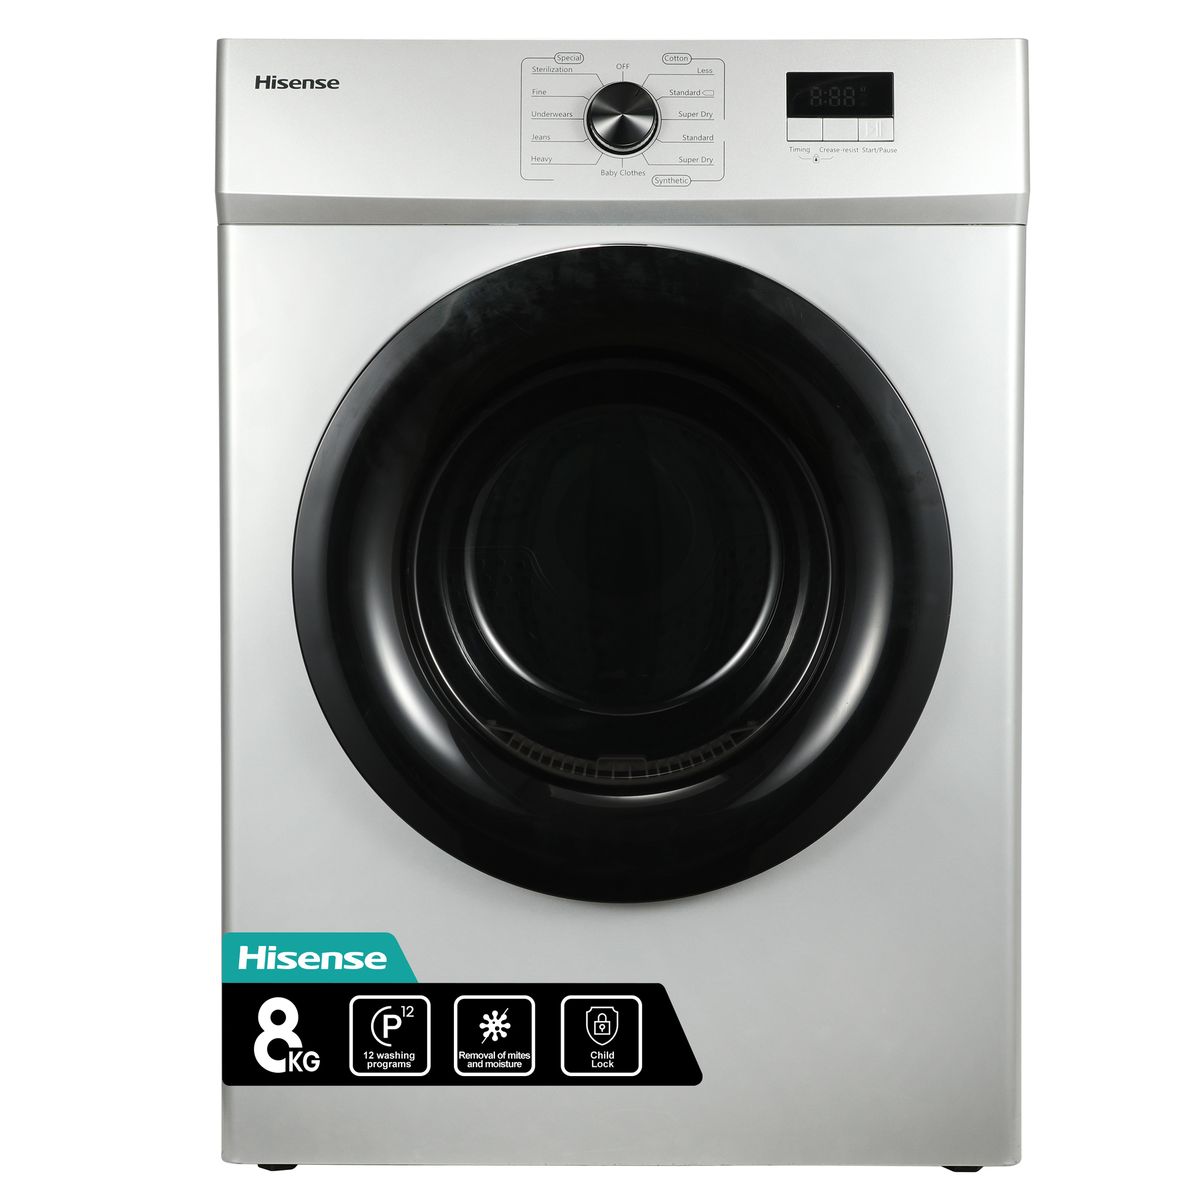 Hisense 8Kg Air Vented Tumble Dryer with LED Display - Silver